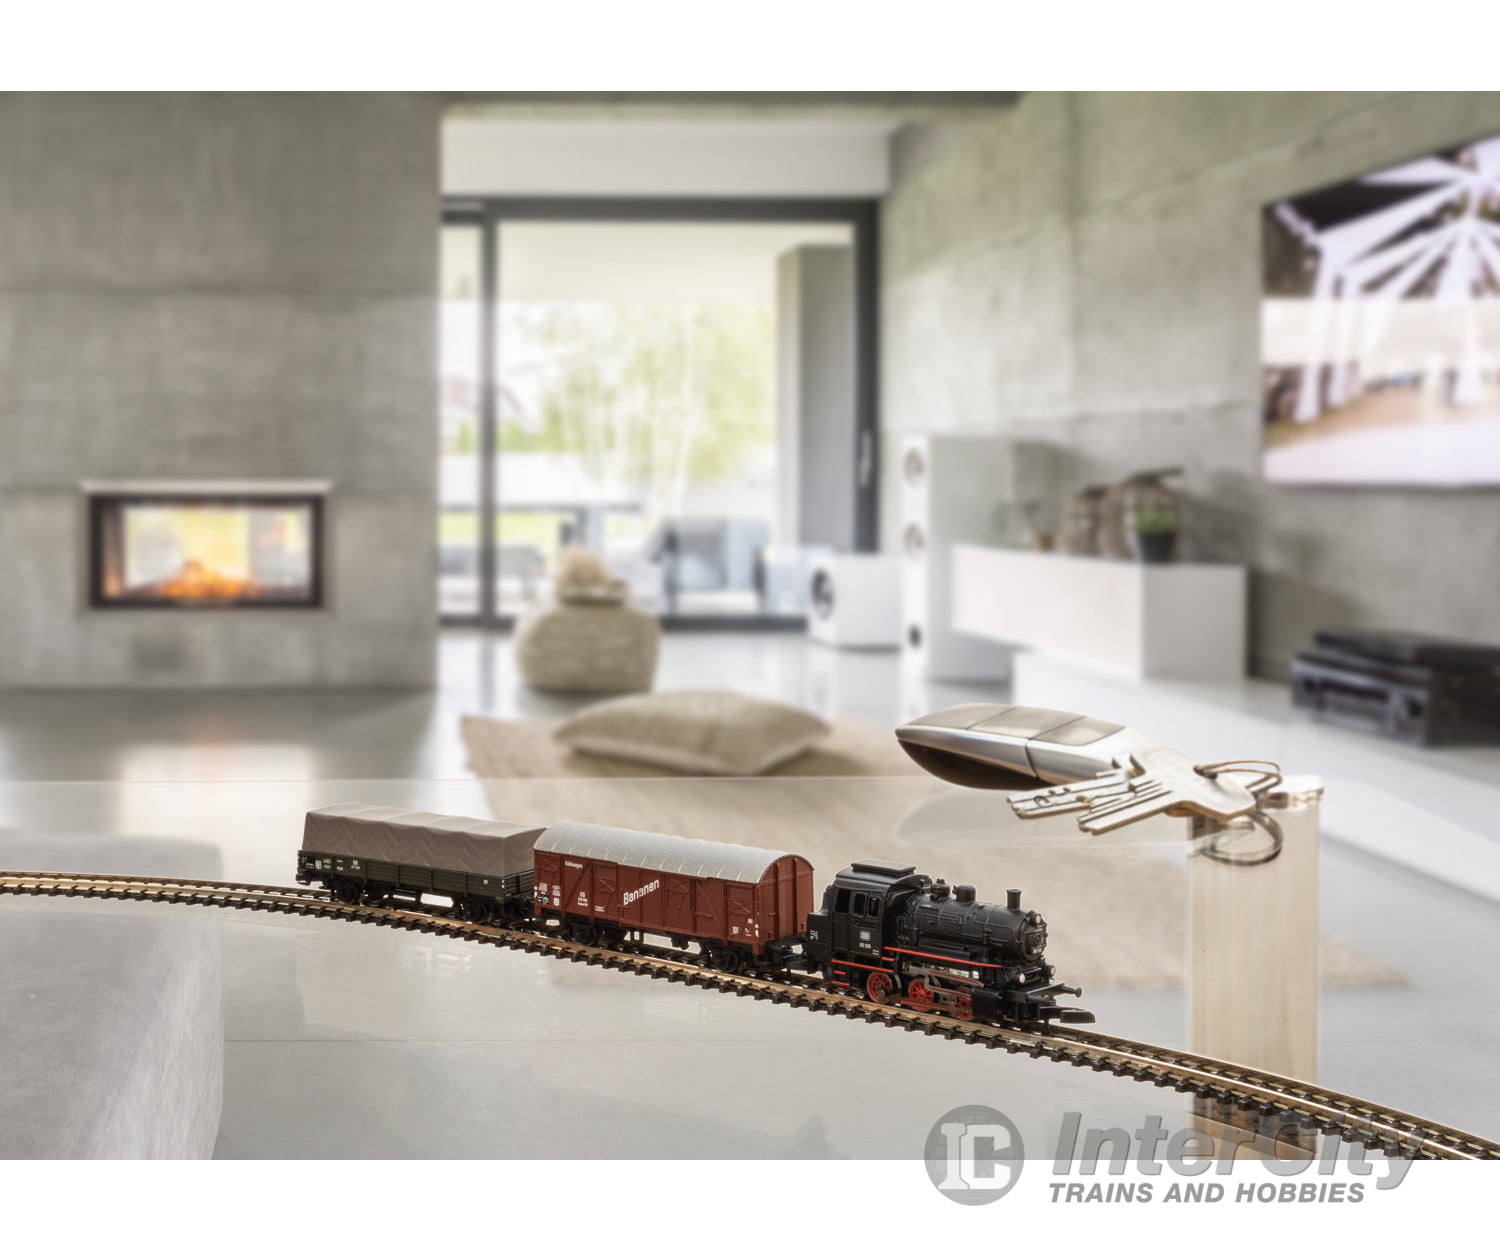 Marklin 81701 DB "Freight Train" Starter Set with a Class 89 Steam Locomotive, and Oval of Track, a Locomotive Controller, and a Power Supply - Default Title (IC-MARK-81701)